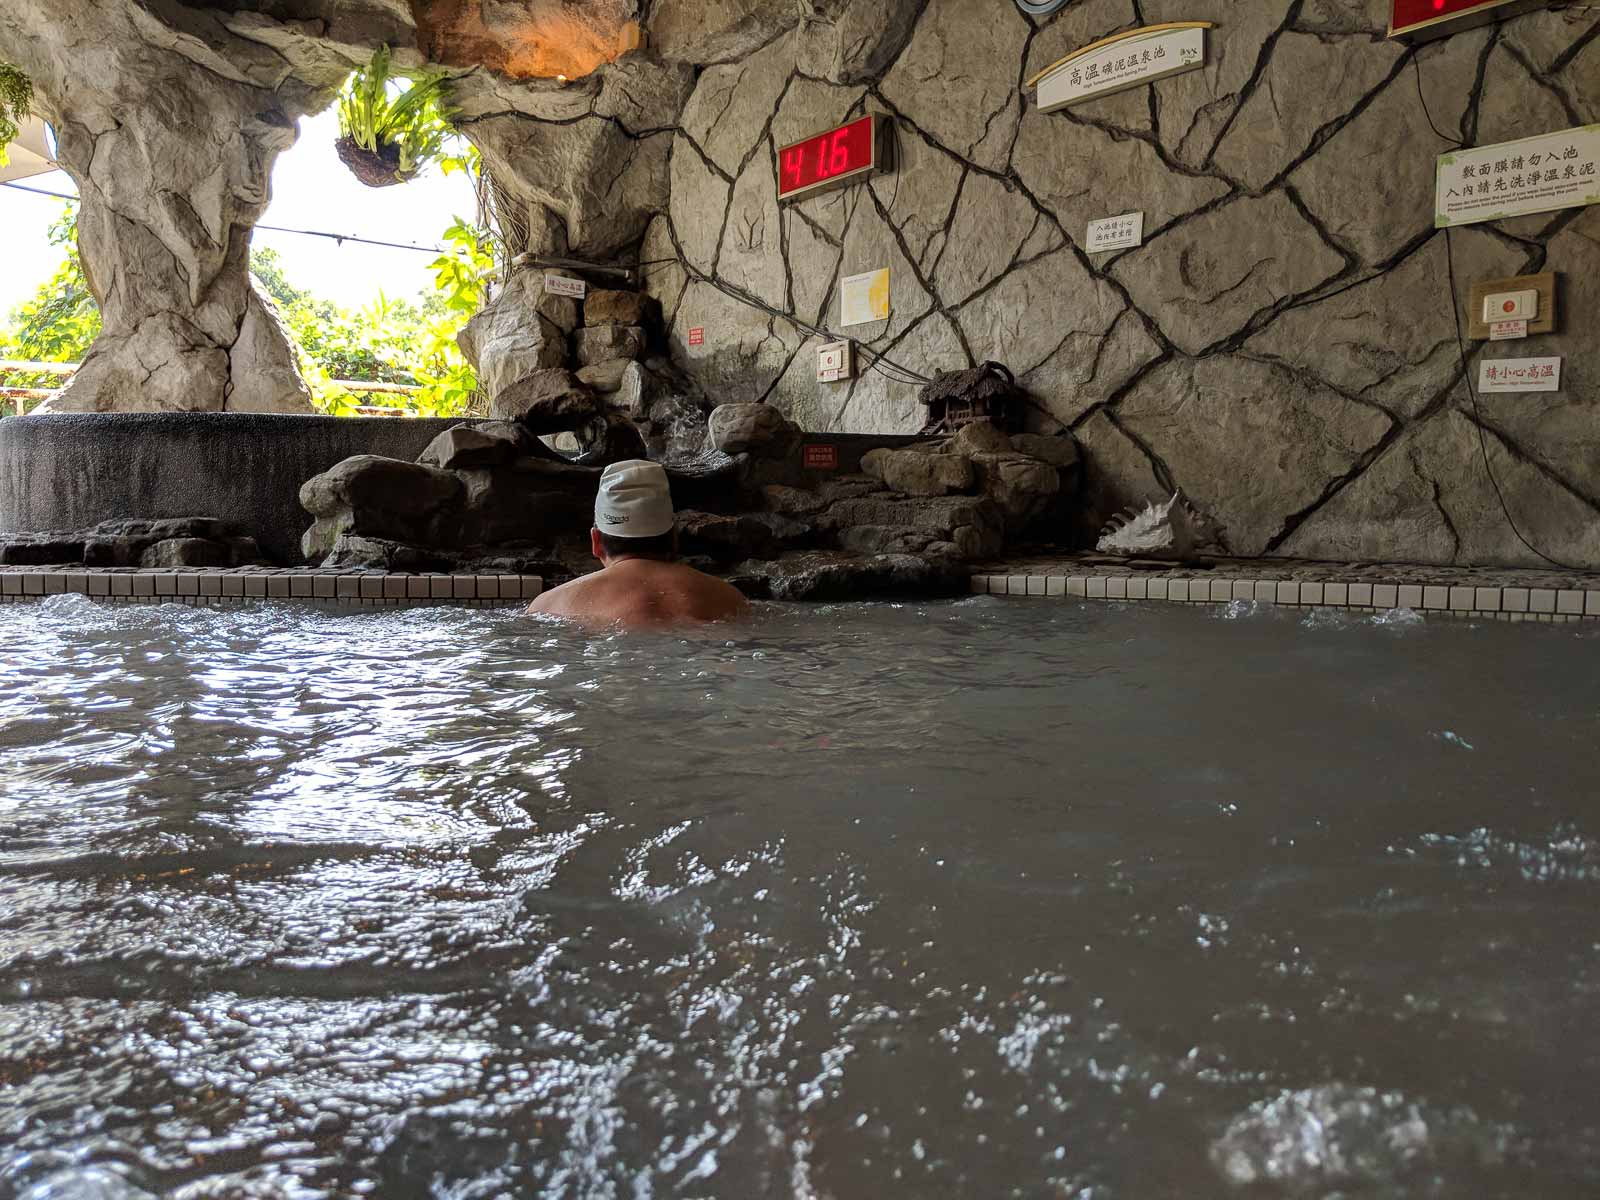 A hot spring bather soaking in muddy water, a thermometer reads 41.6 degrees Celsius.